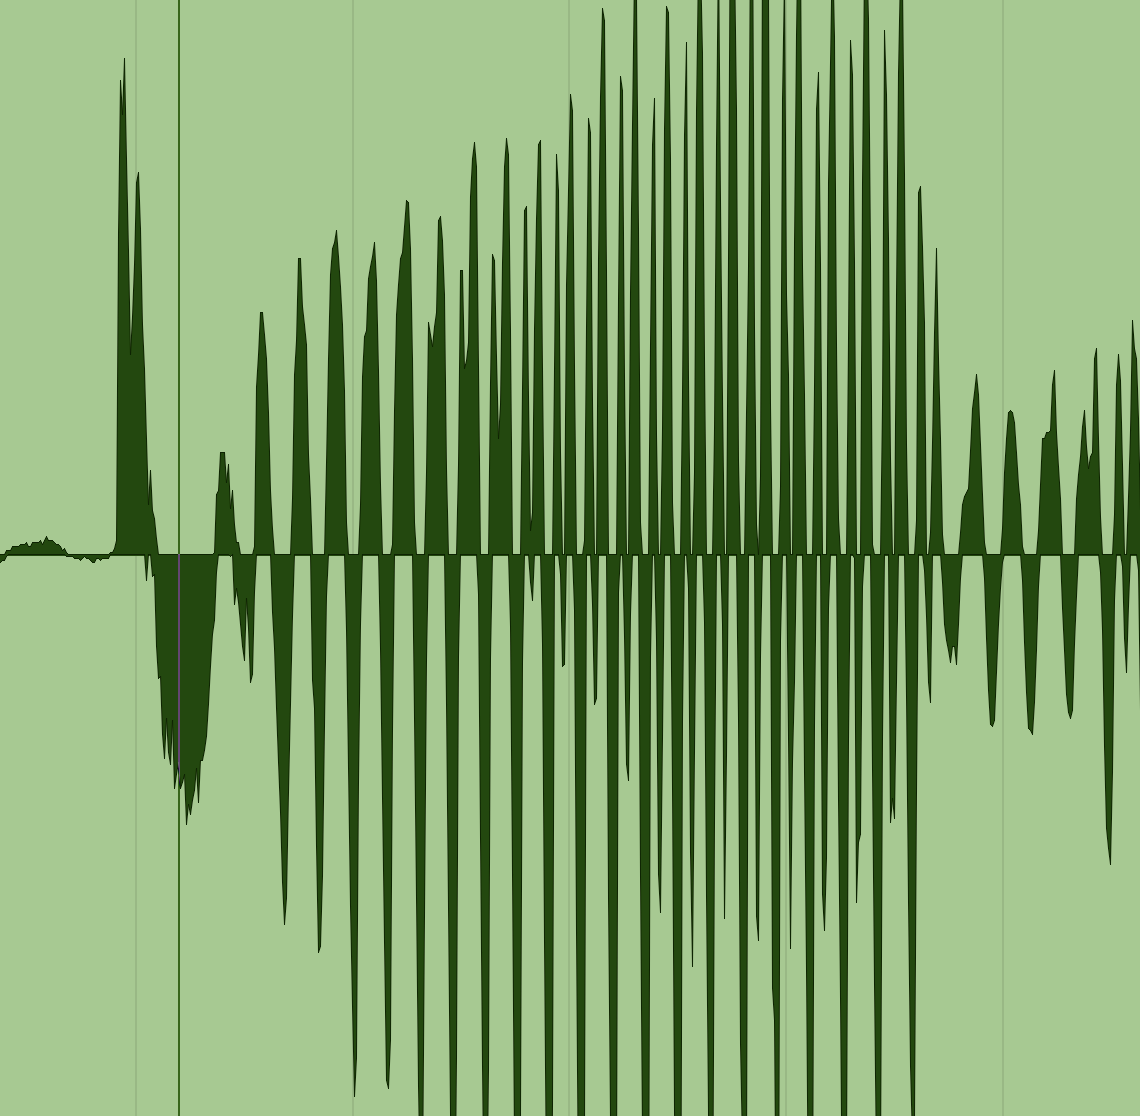 example of a plosive in pro tools waveform